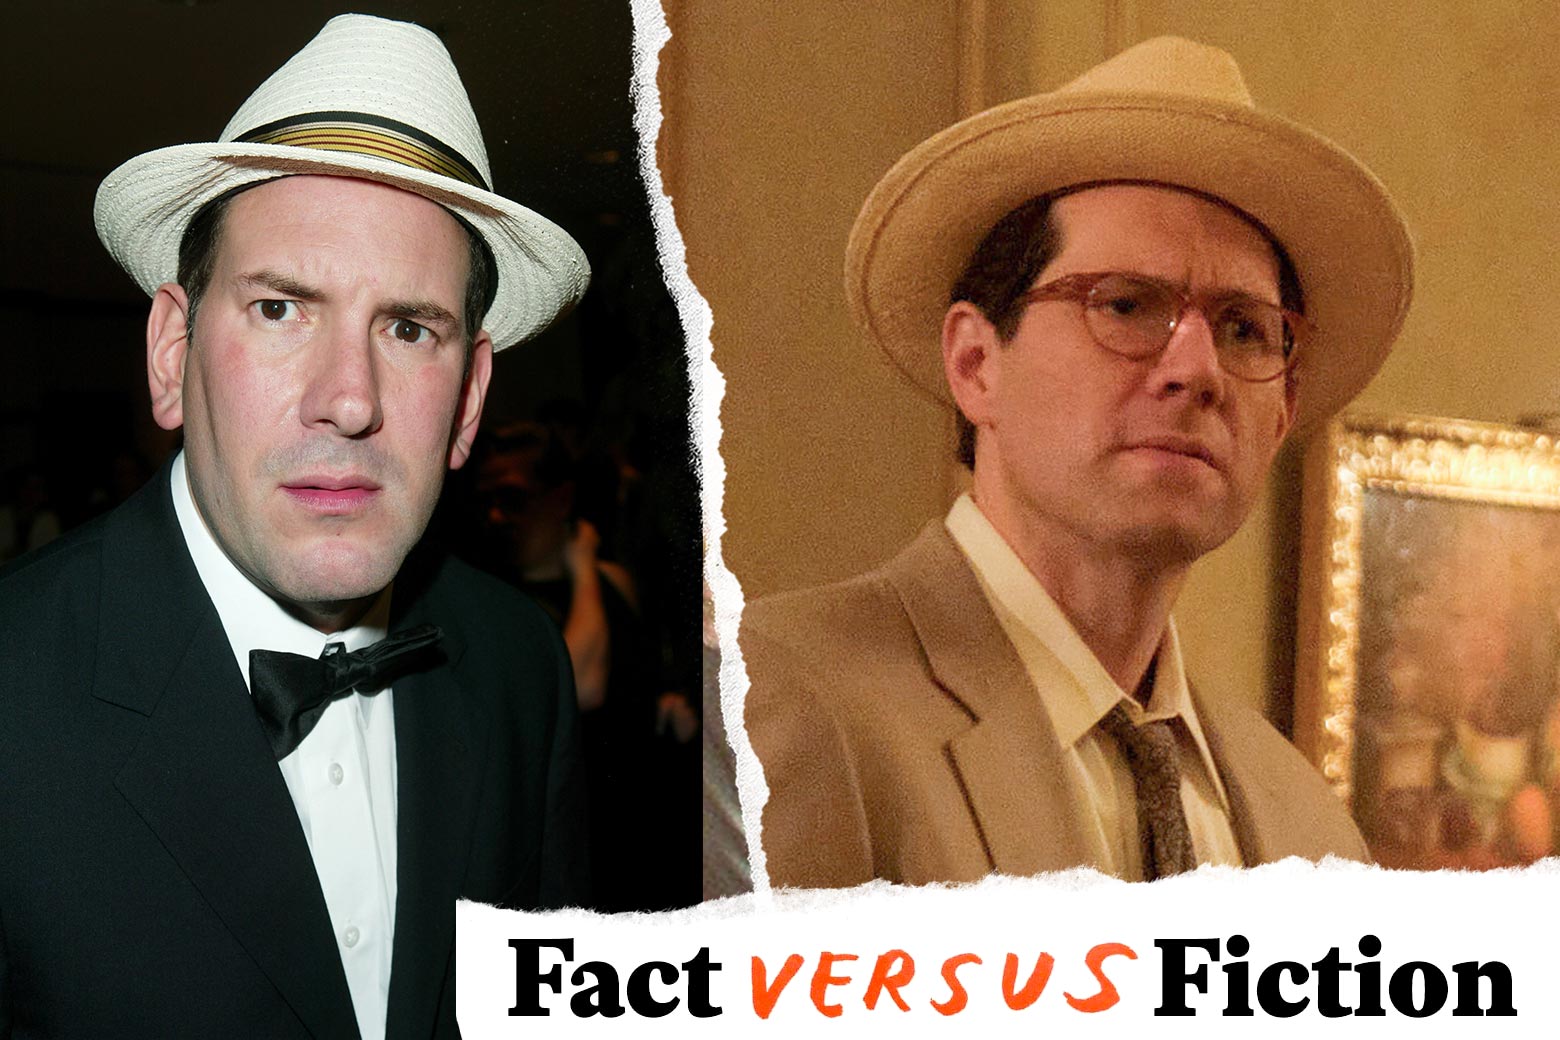 Side-by-side photos of Drudge and Eichner both wearing a fedora and a suit